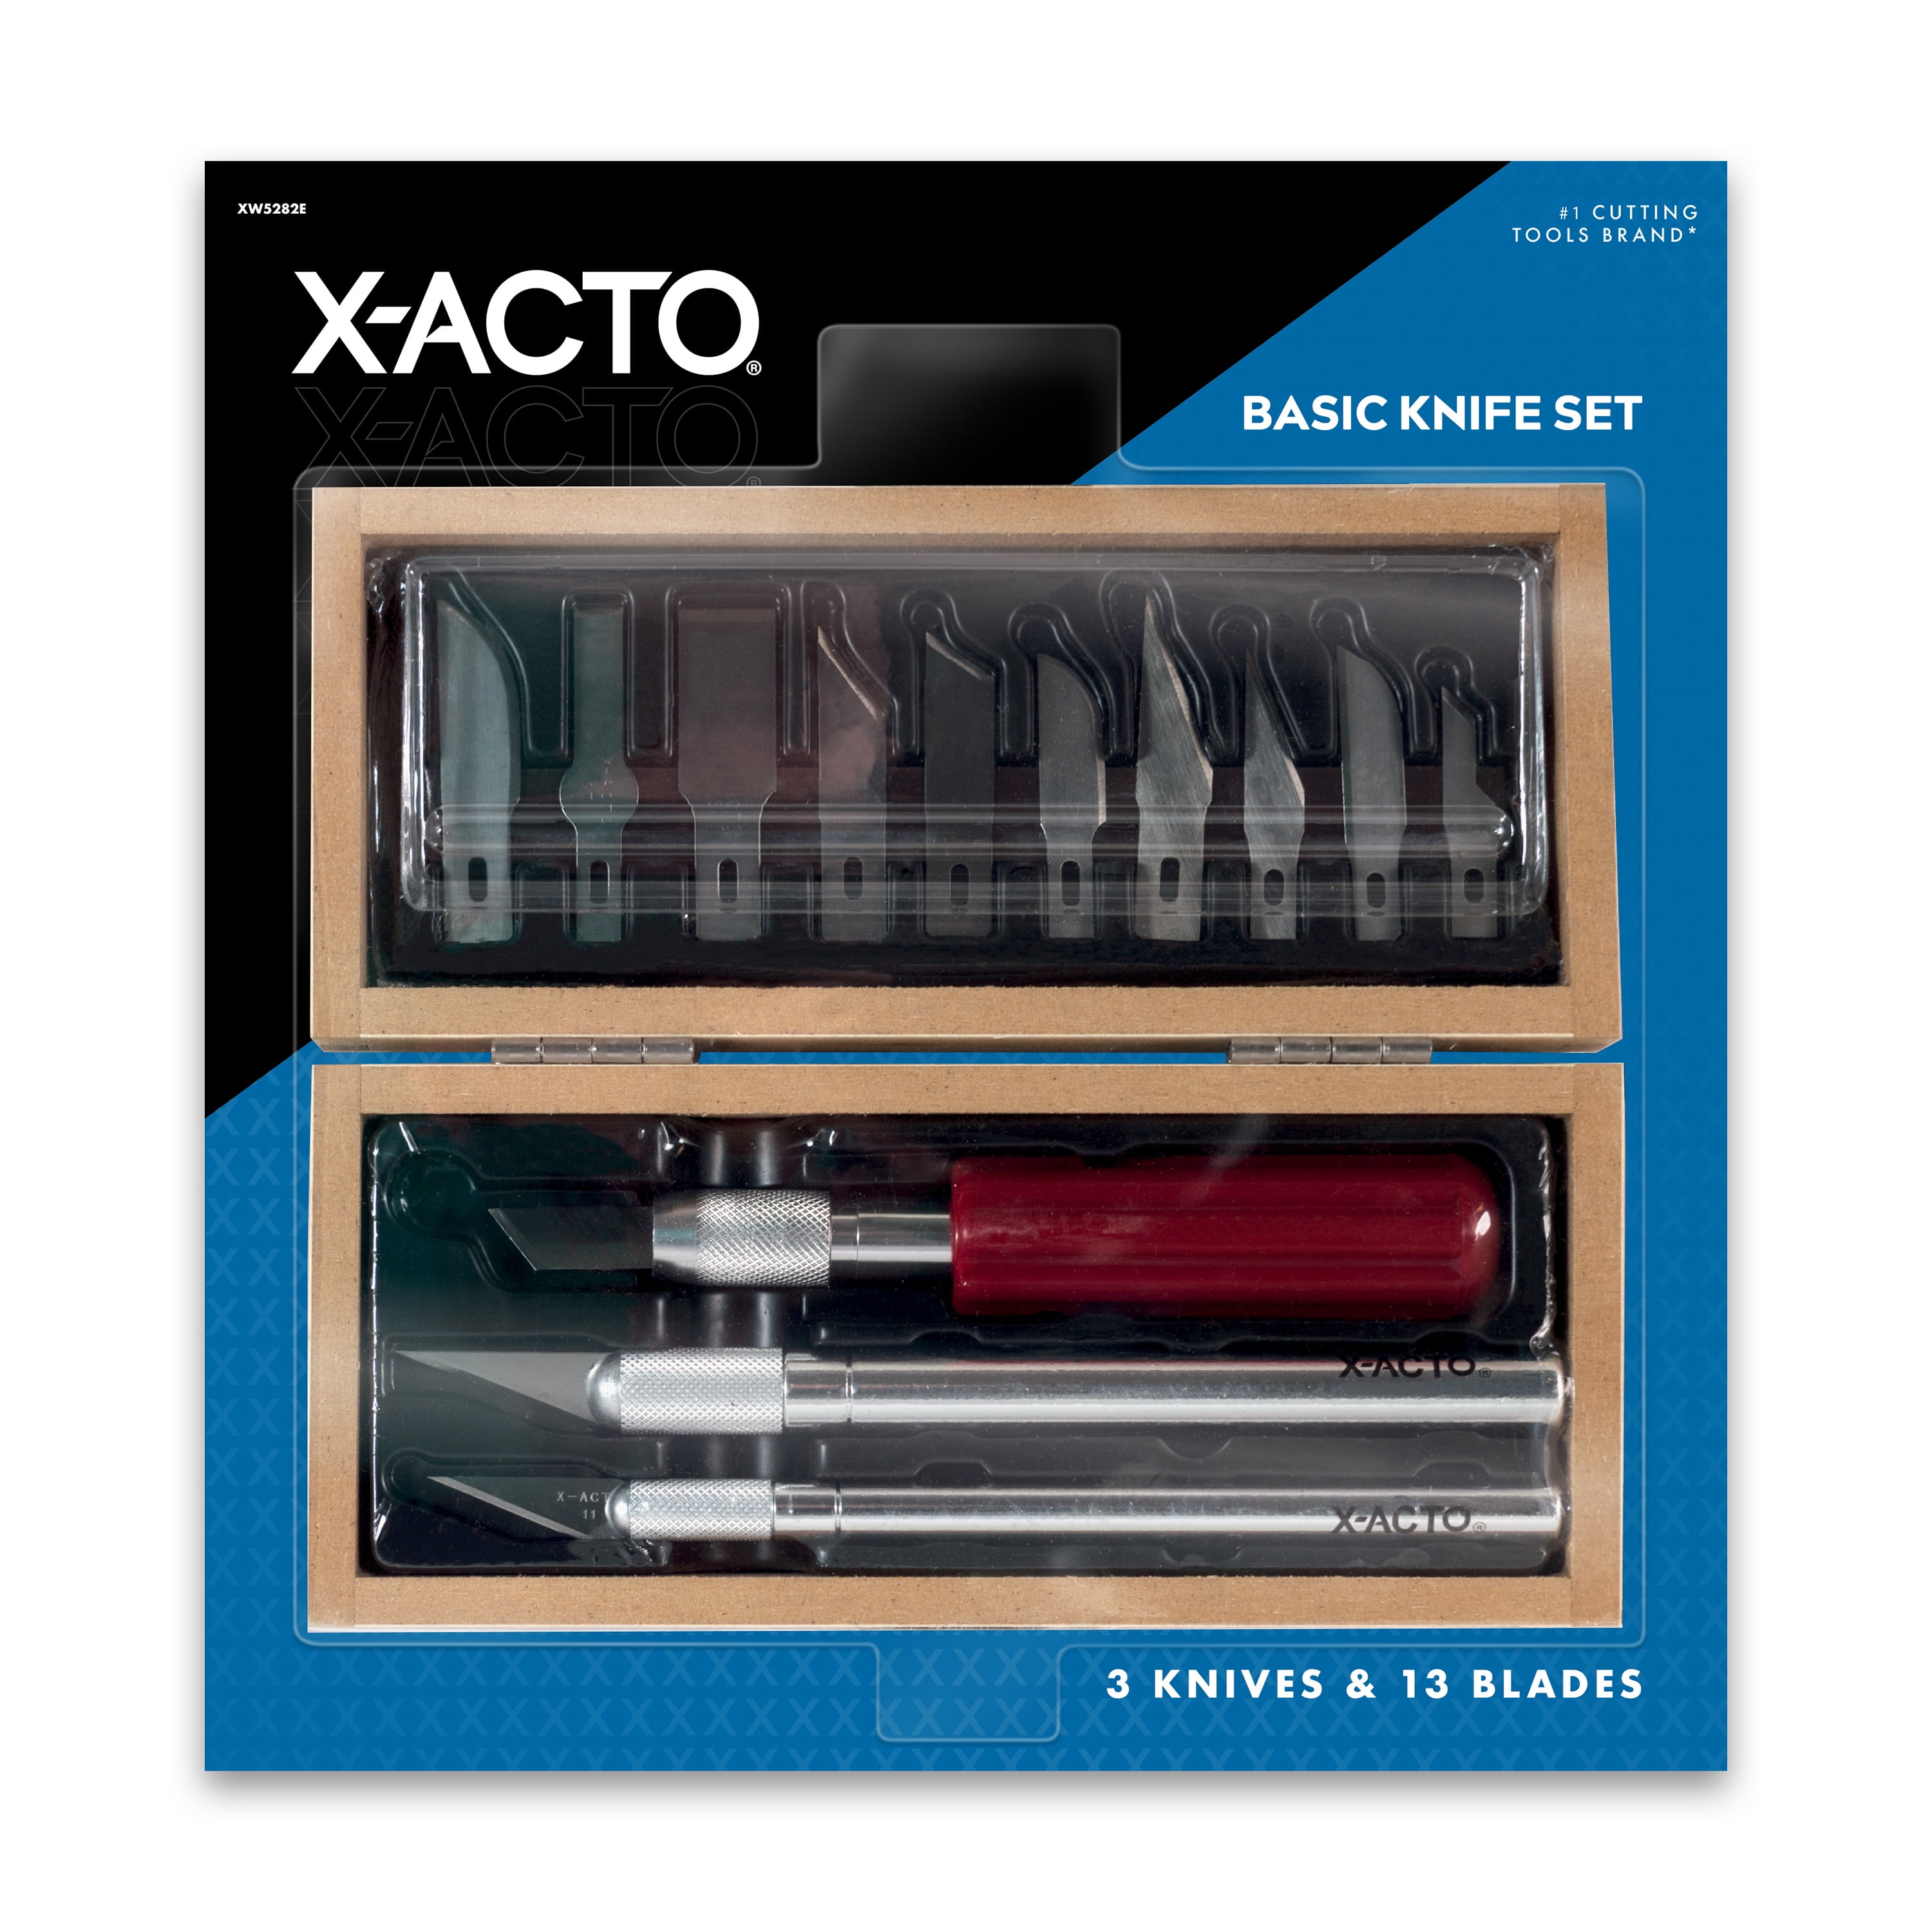 X-Acto Vintage Crafting Books